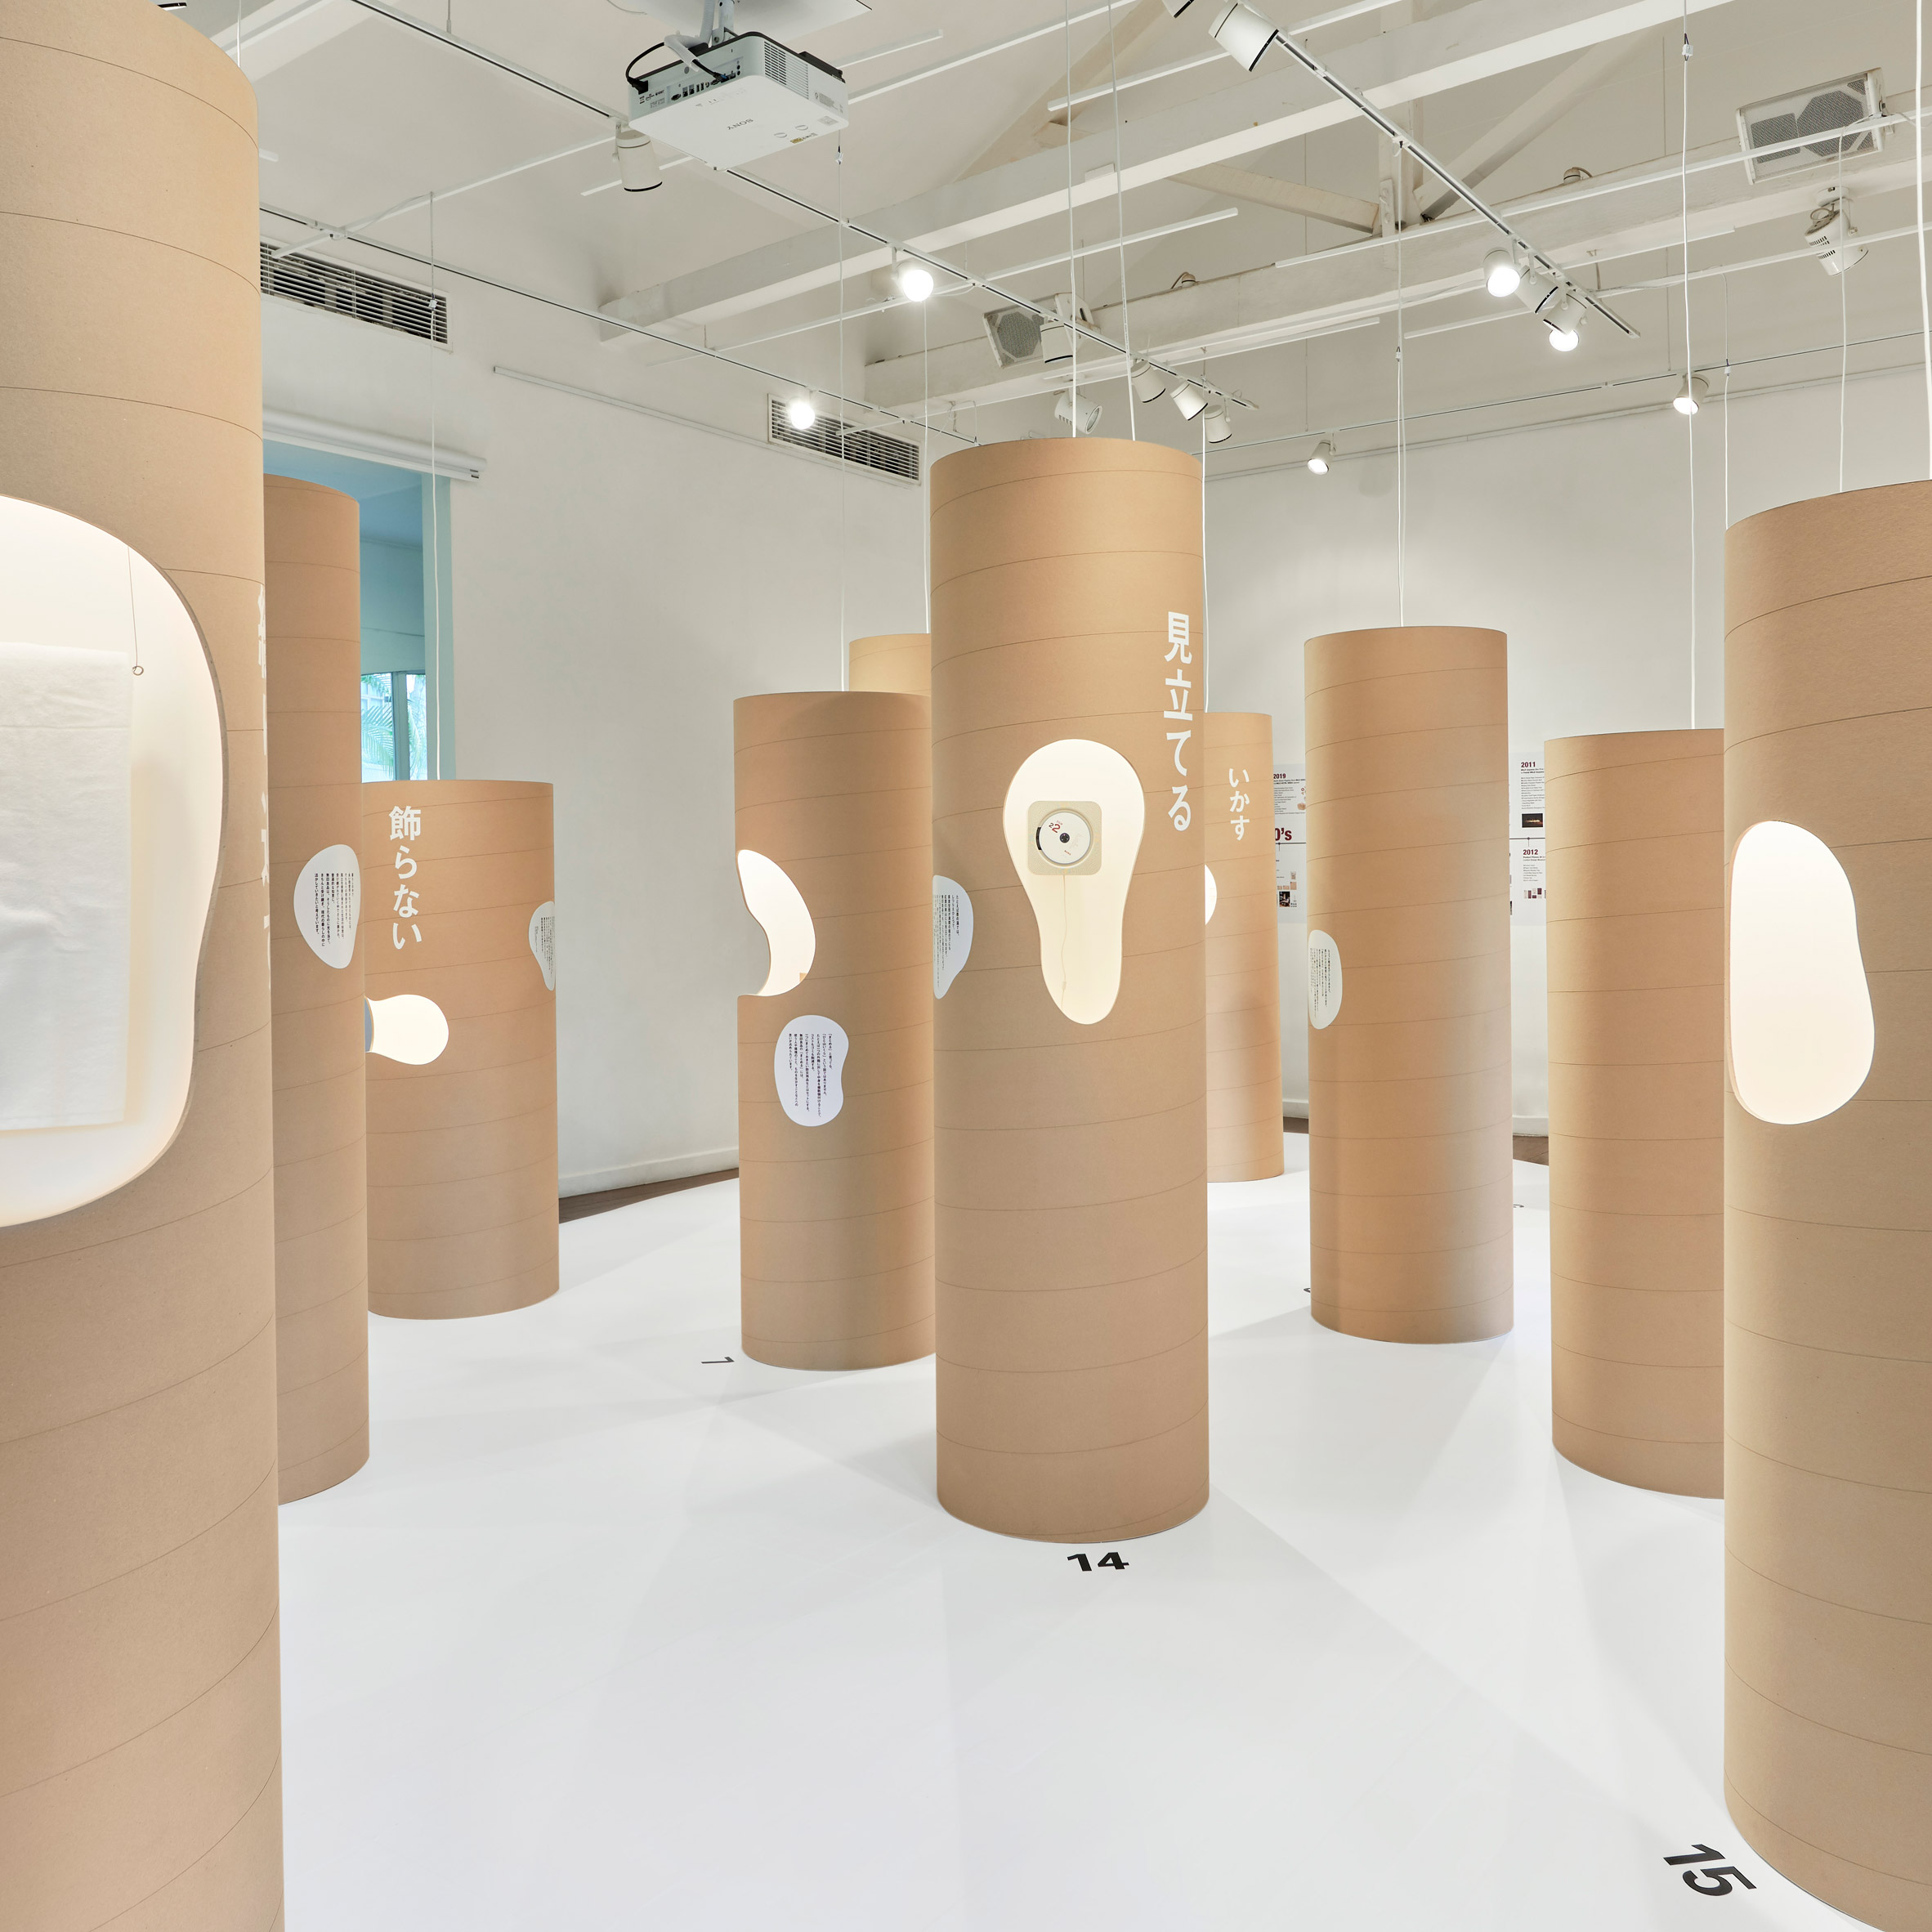 MUJI IS wooden trees with display